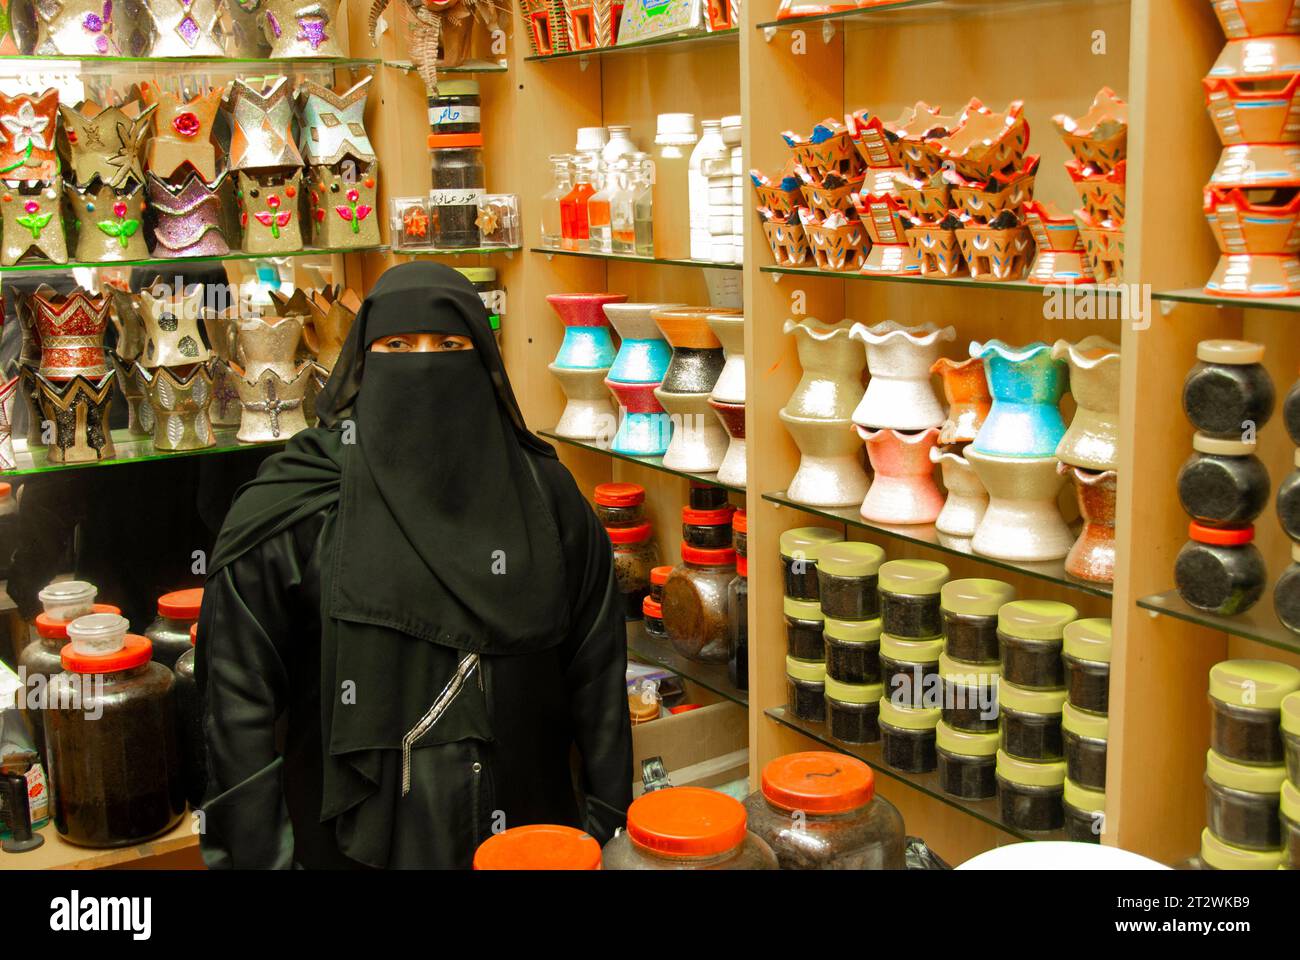 A woman wearing full traditional clothing sells products at a small shop in Salalah in the south of Oman Stock Photo